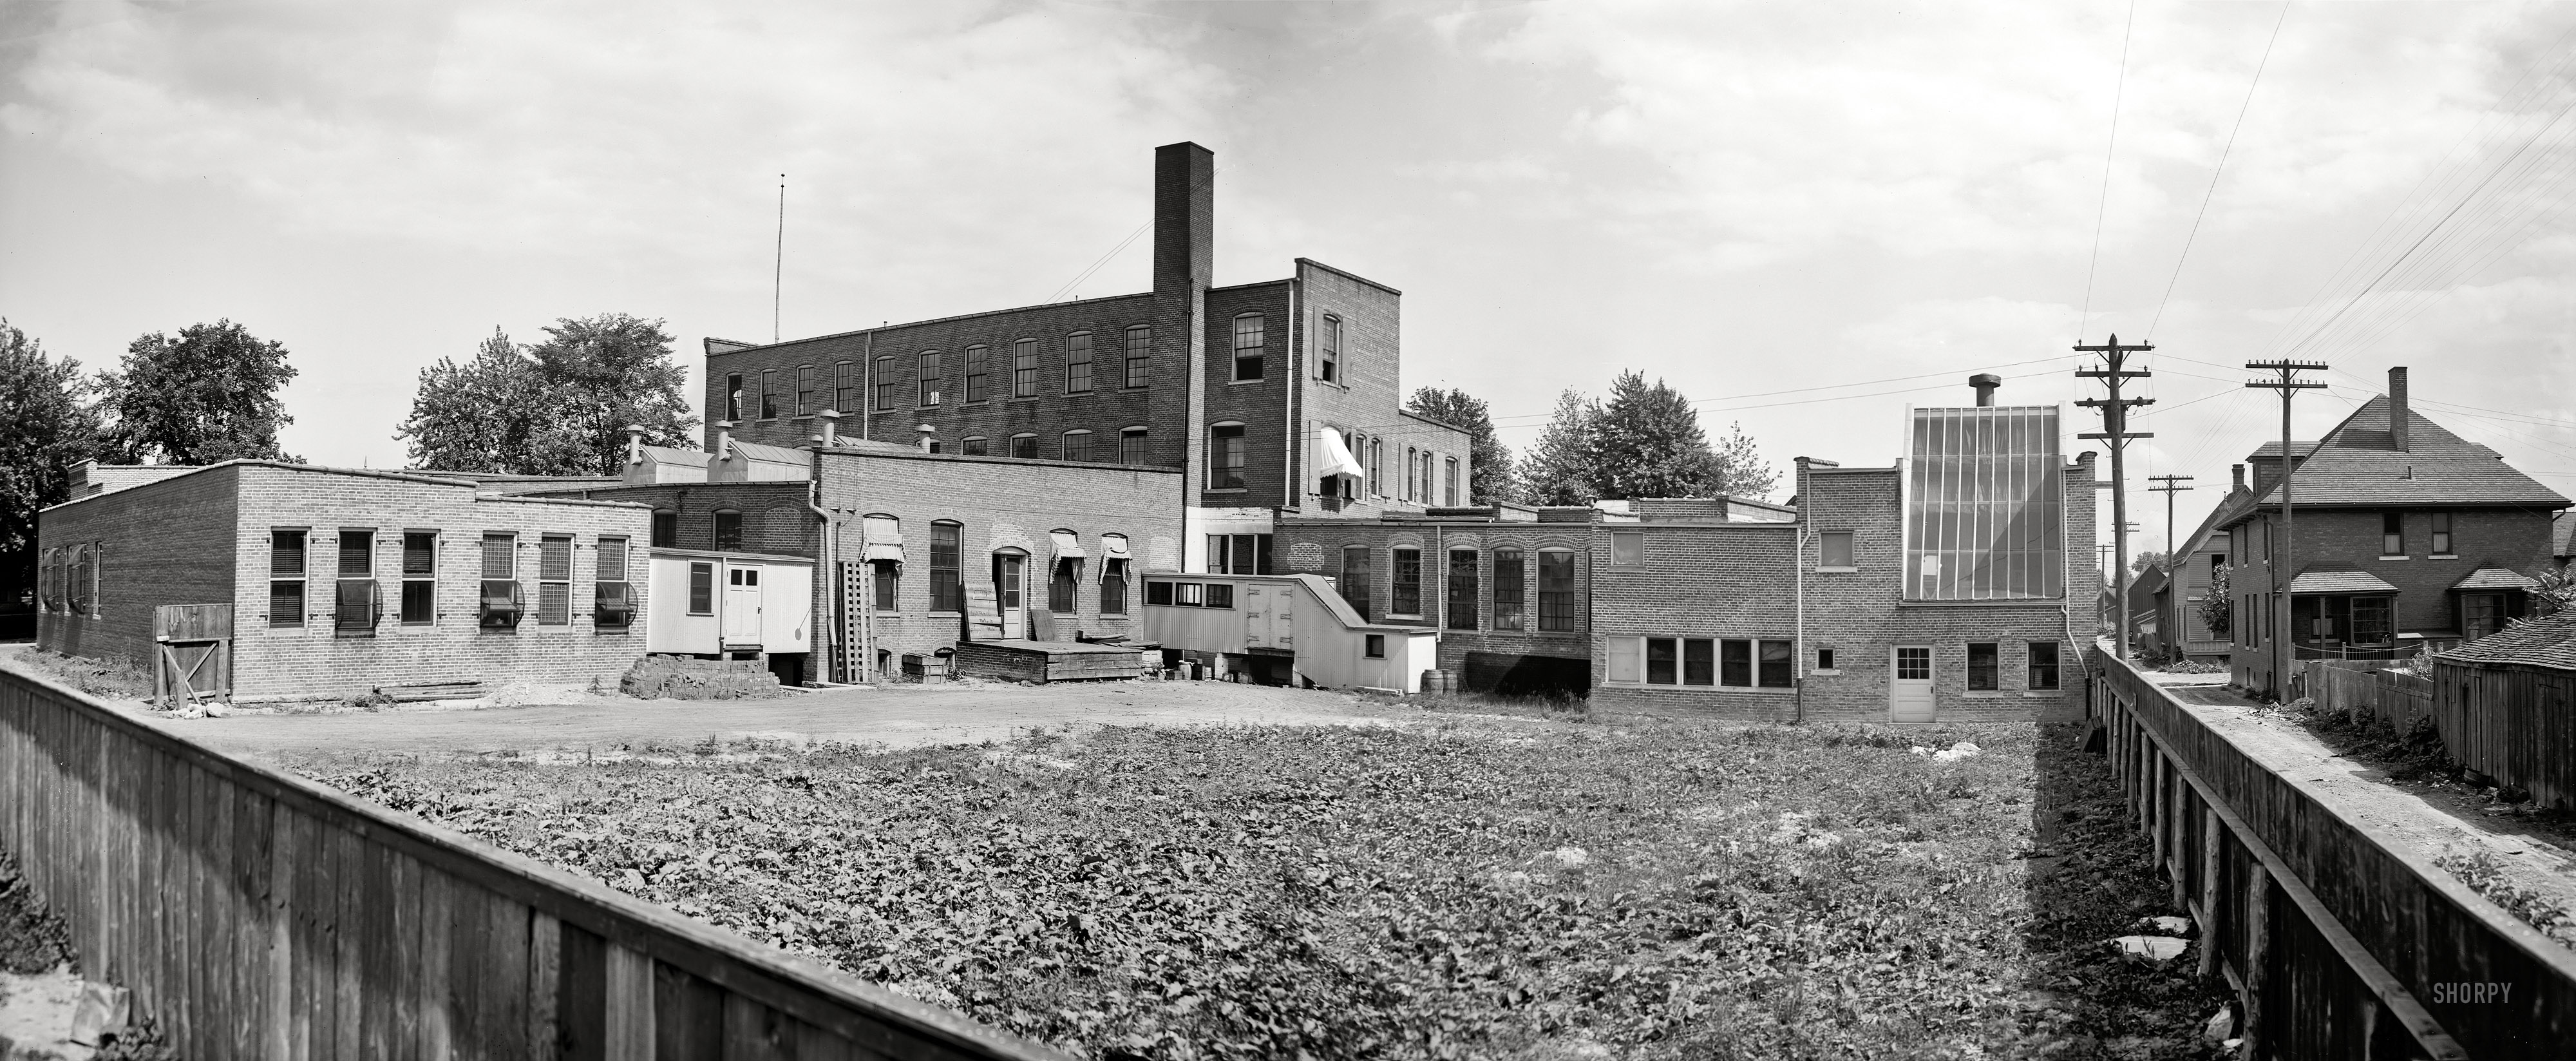 Detroit circa 1906. "Detroit Publishing Co., northwest view." Note the greenhouse-style glass to the right employing sunlight for printing and perhaps enlargement, as well as the unusual windows to the left. In the early years of the 20th century, the company was one of the world's biggest producers of color postcards. Panorama made from two 8x10 inch glass negatives. View full size.